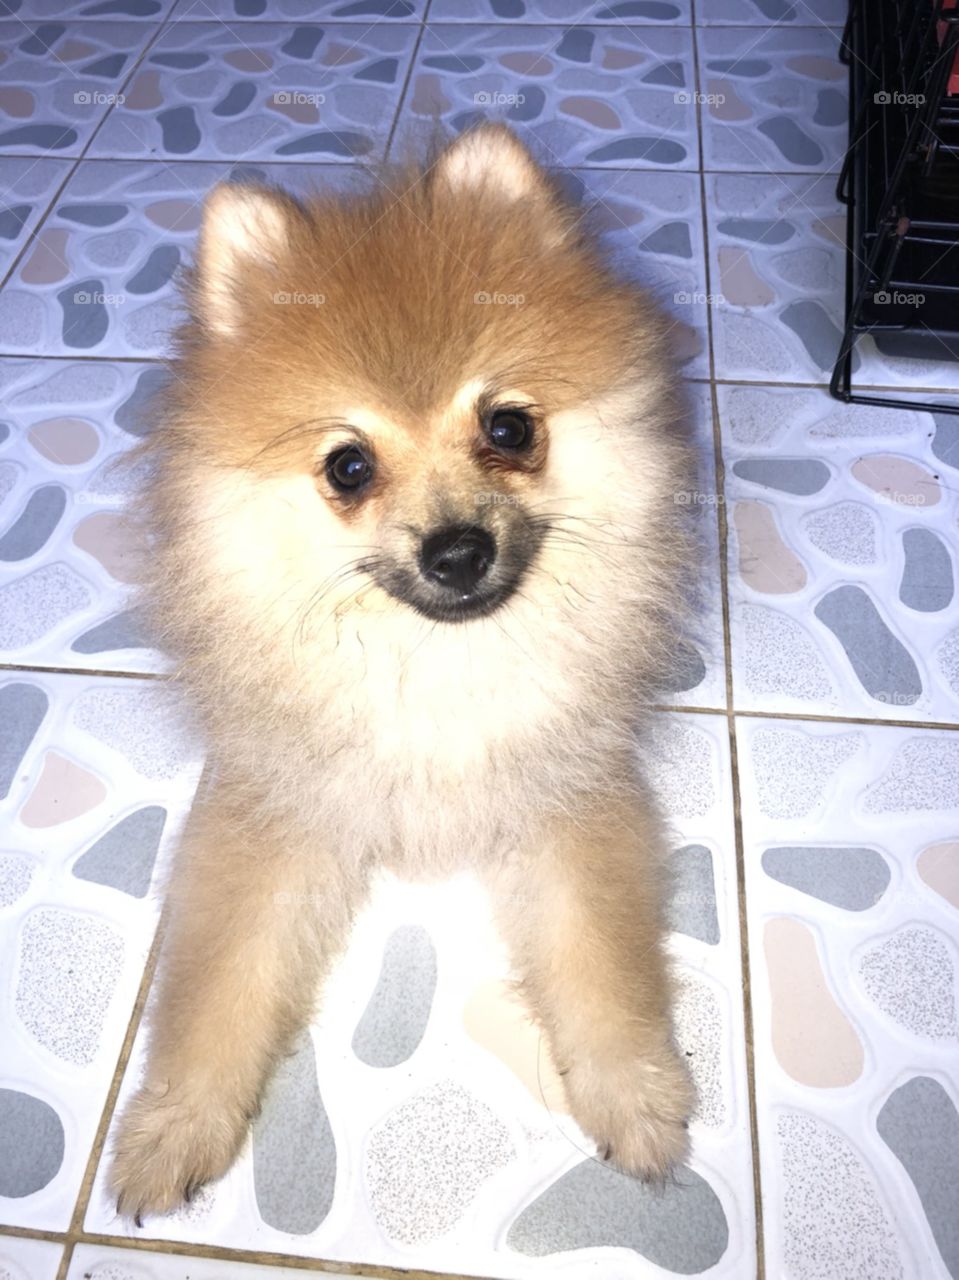 the orange brown puppy "pomeranian" has big  black round eyes , fluuy and furry hair around his neck and his two little ears  point up.